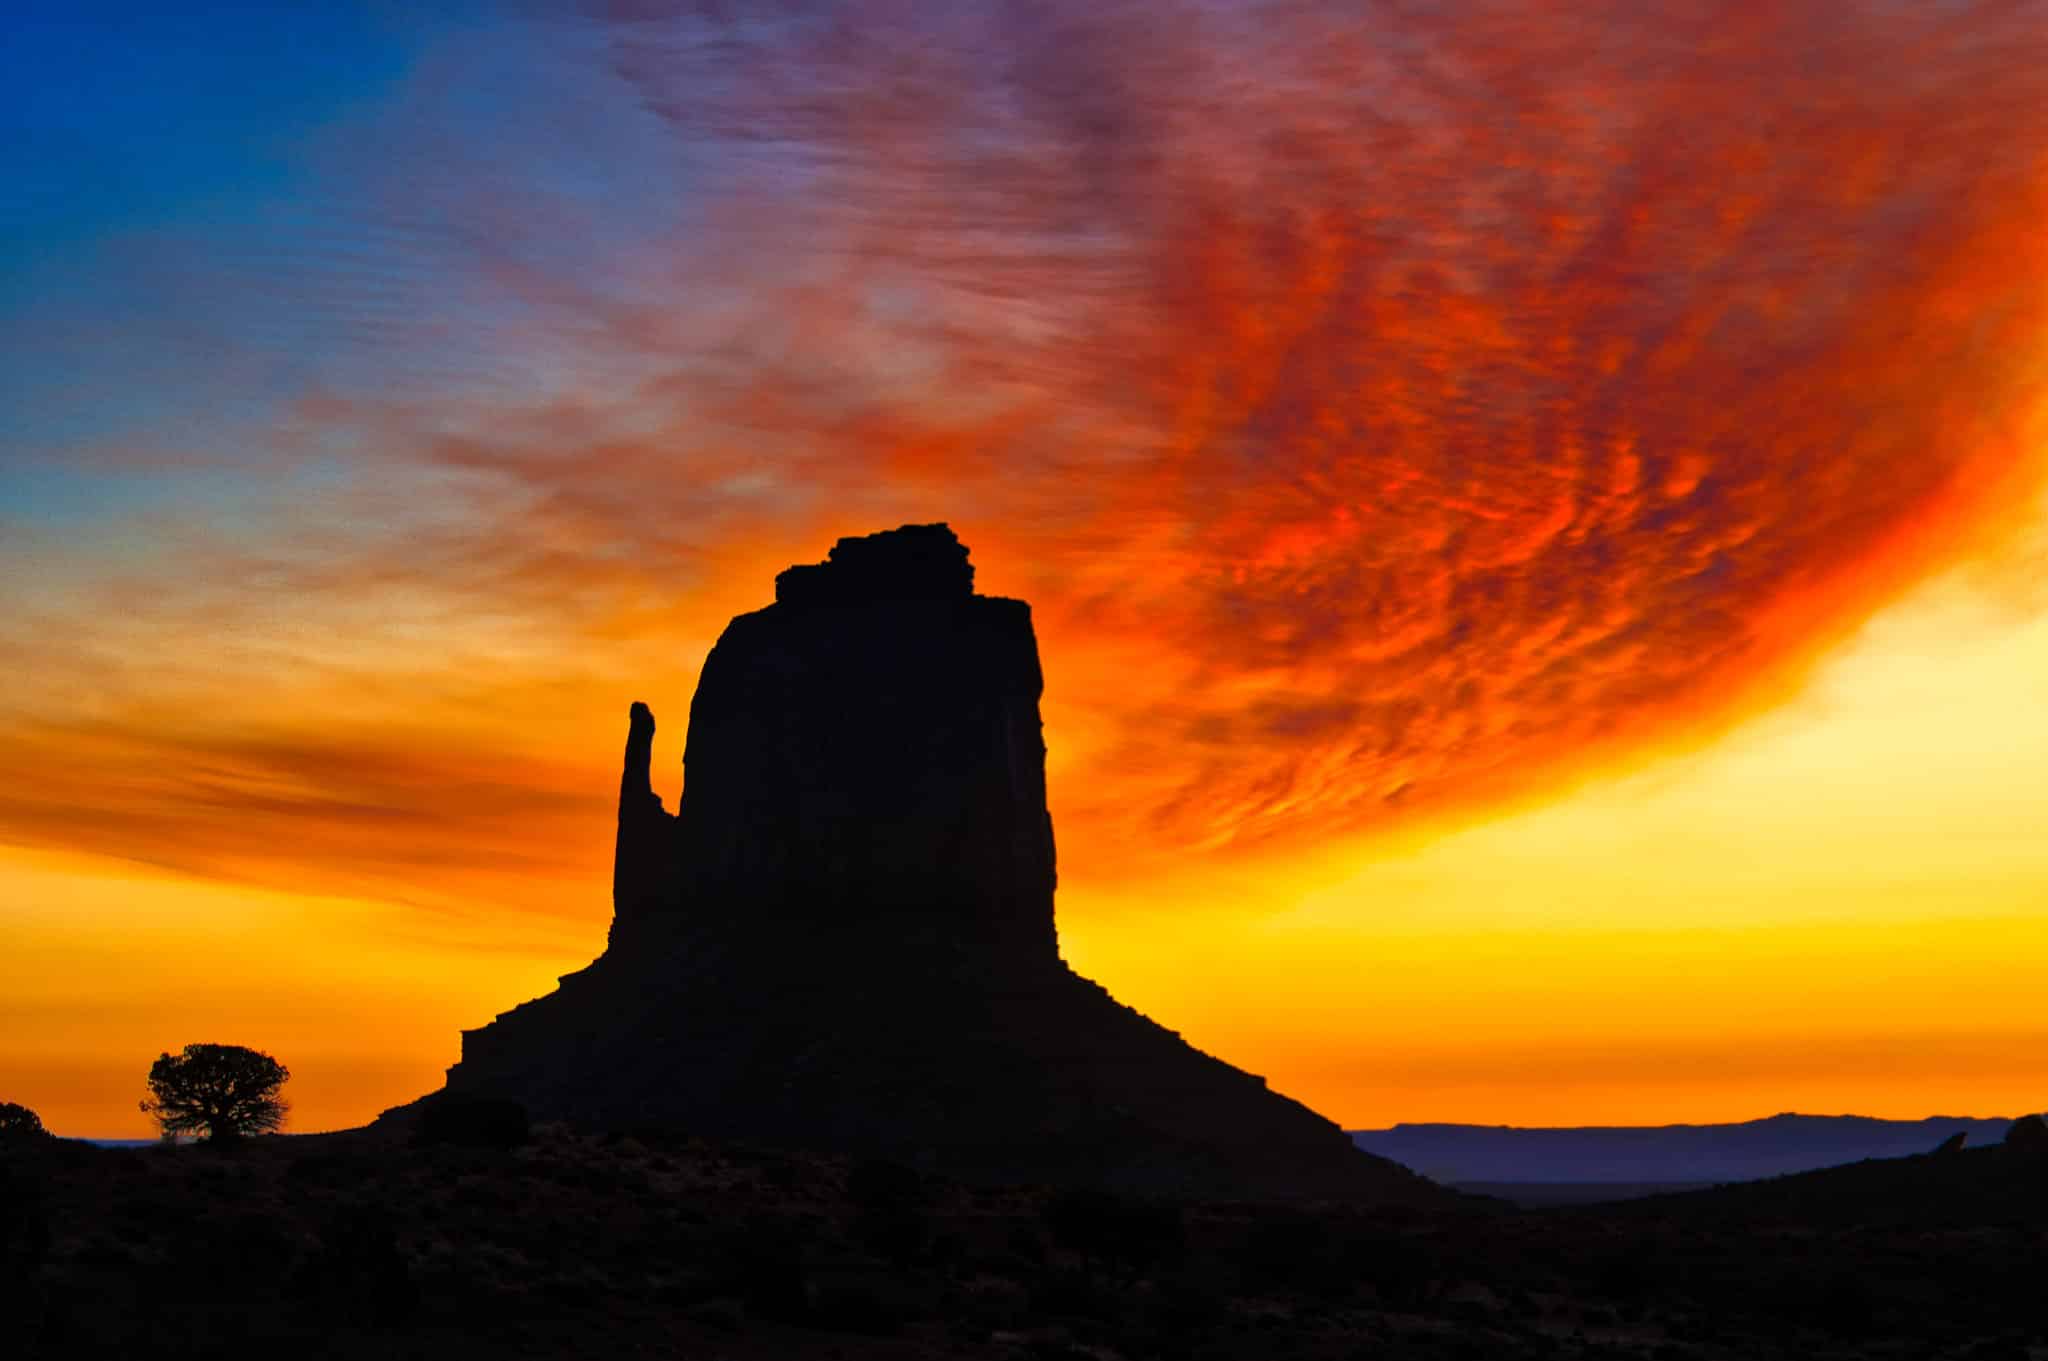 Dawn at near East Mitten in Monument Valley Navajo Tribal Park.